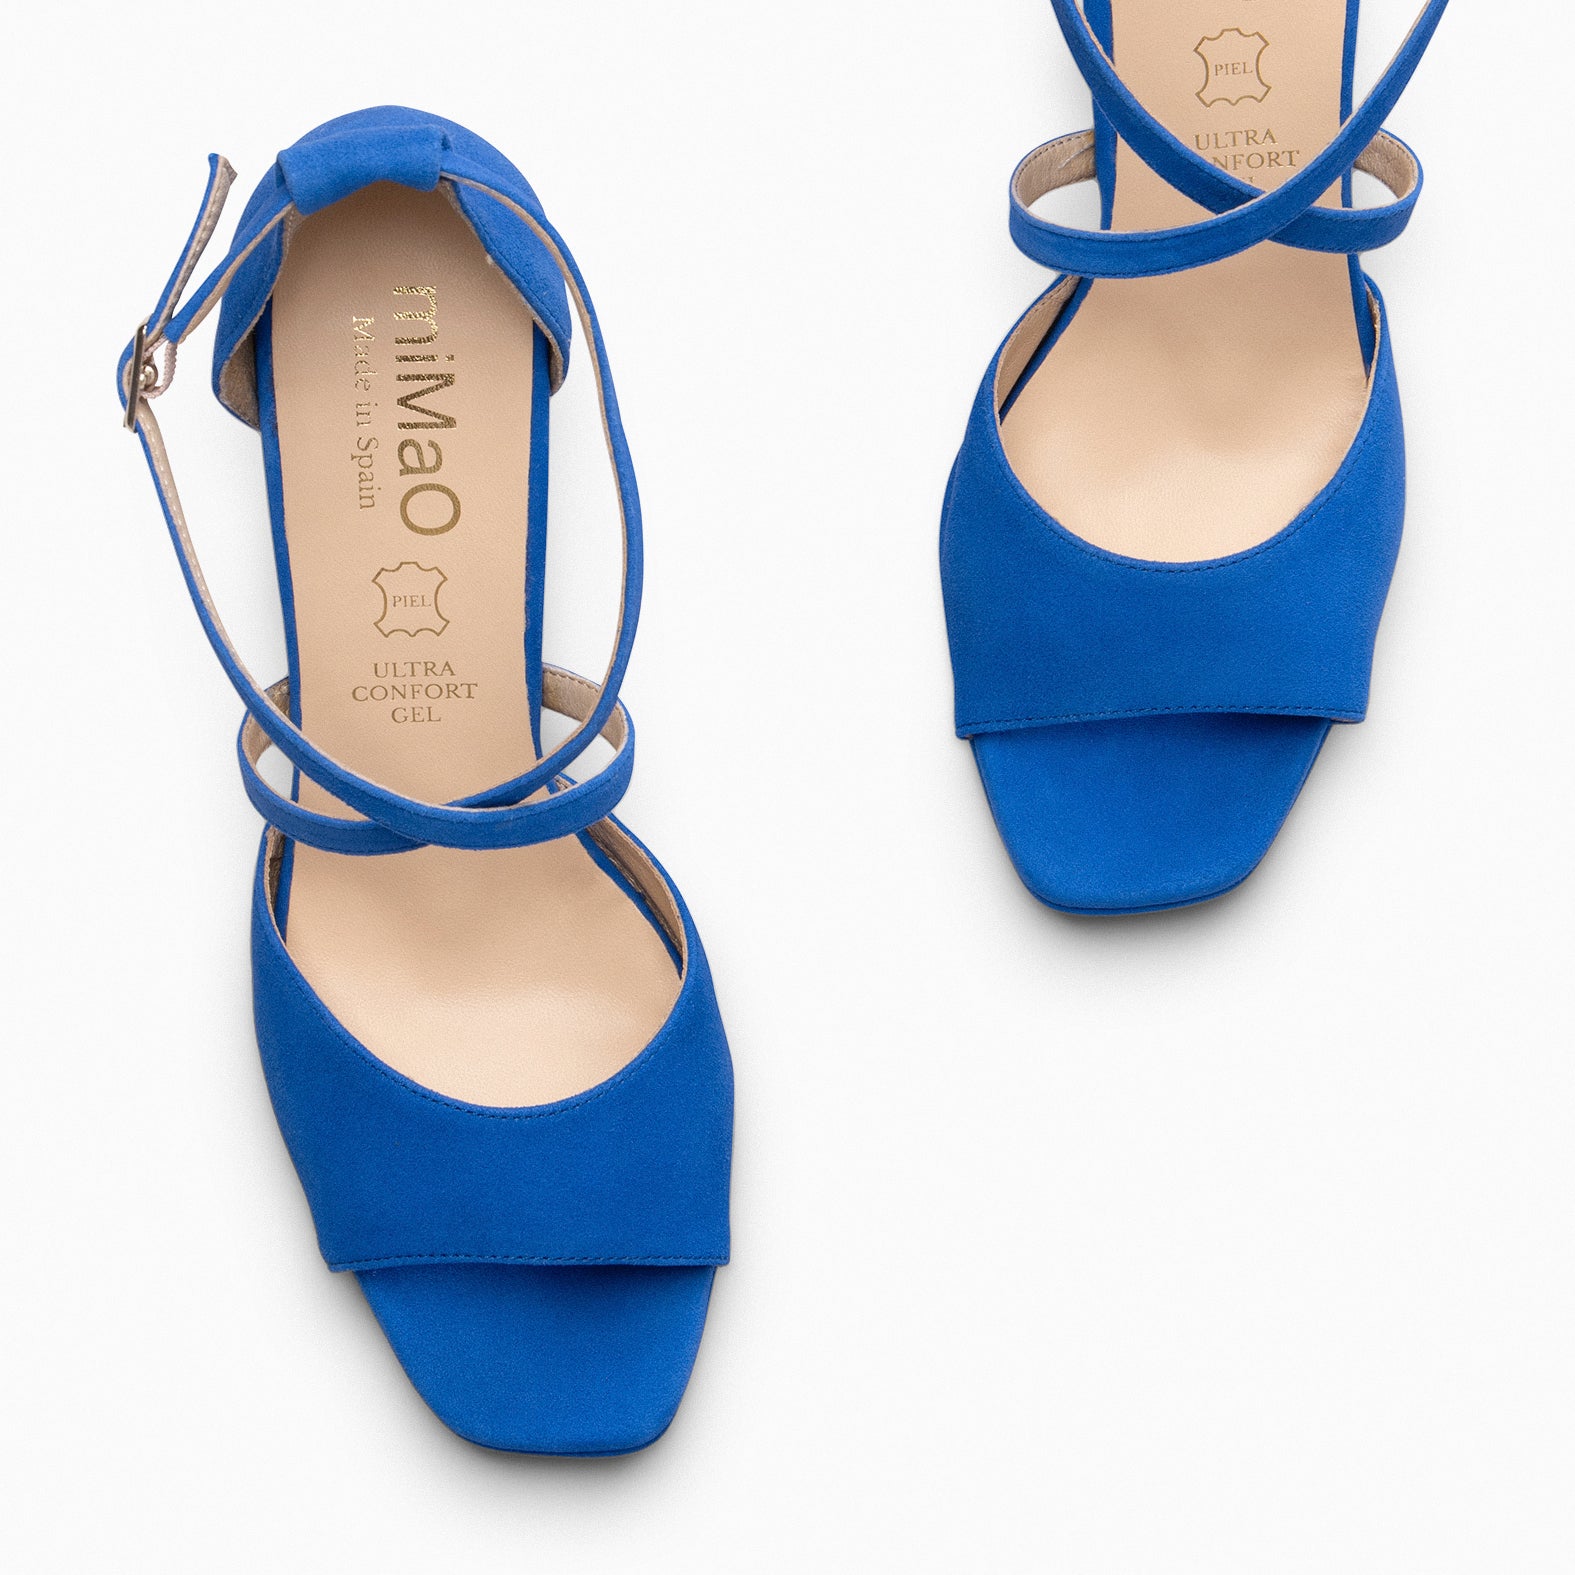 ROSSA - BLUE party sandals with heel